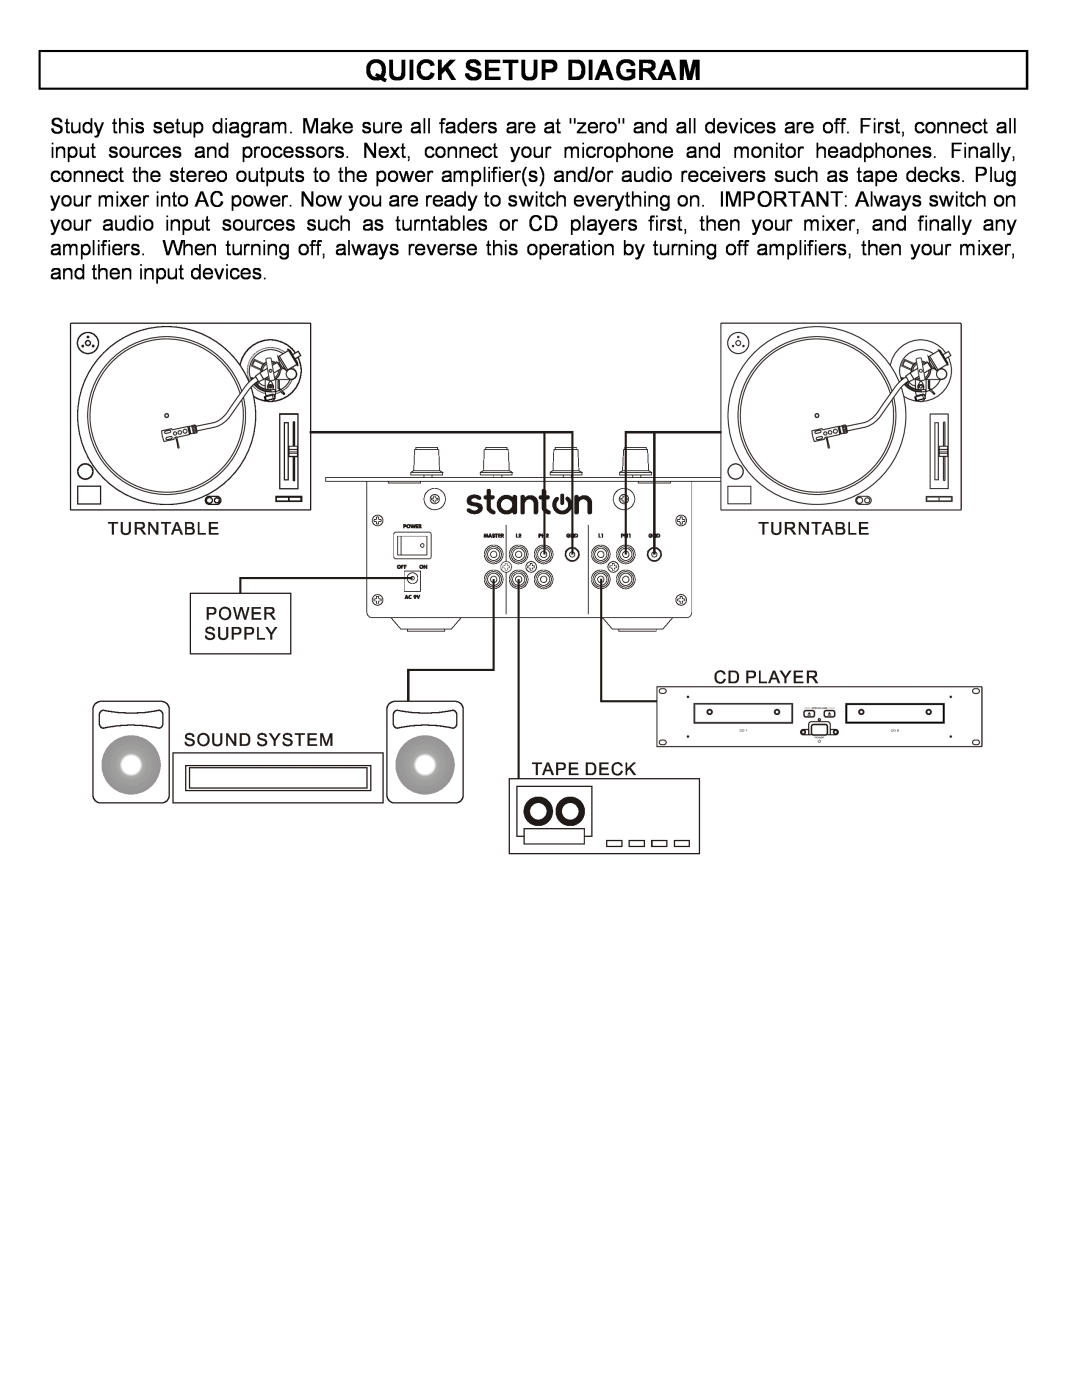 Stanton smx 201 manual Quick Setup Diagram, Turntable Power Supply Sound System, Turntable Cd Player Tape Deck 